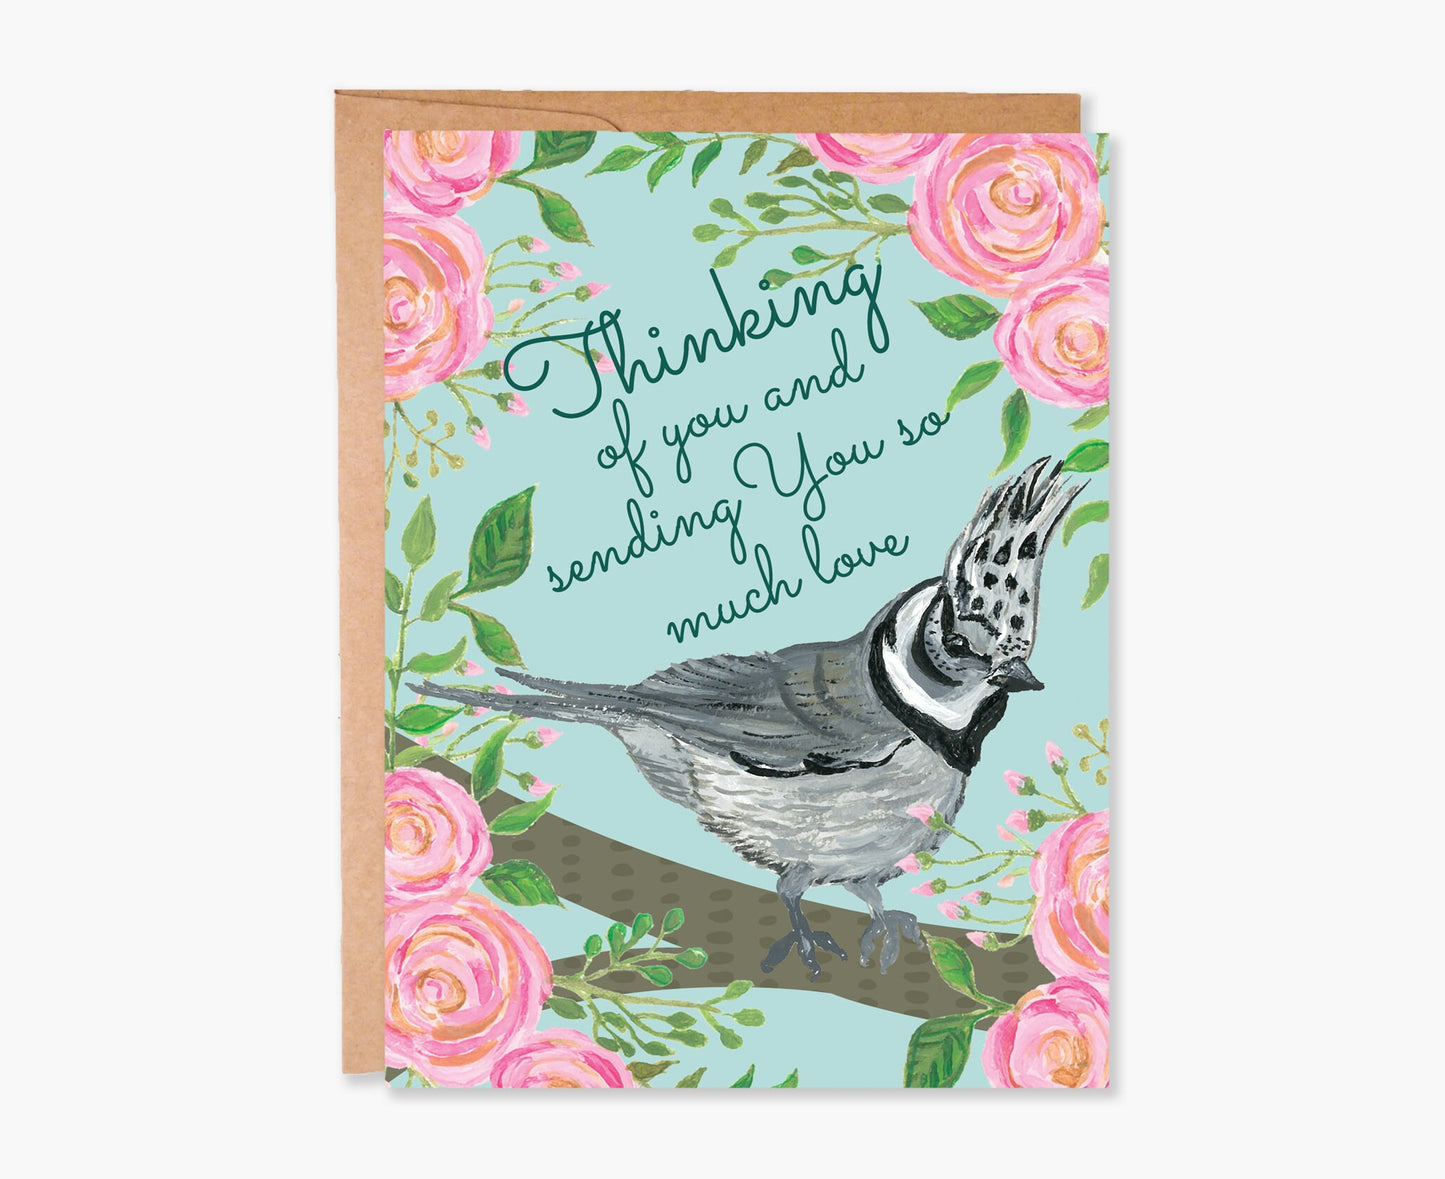 Thinking of You Floral Card,  Friendship Greeting, Positive Pick Me Up Card, Get Well Soon Card, Recovery Card, Item Code - COTC TH01